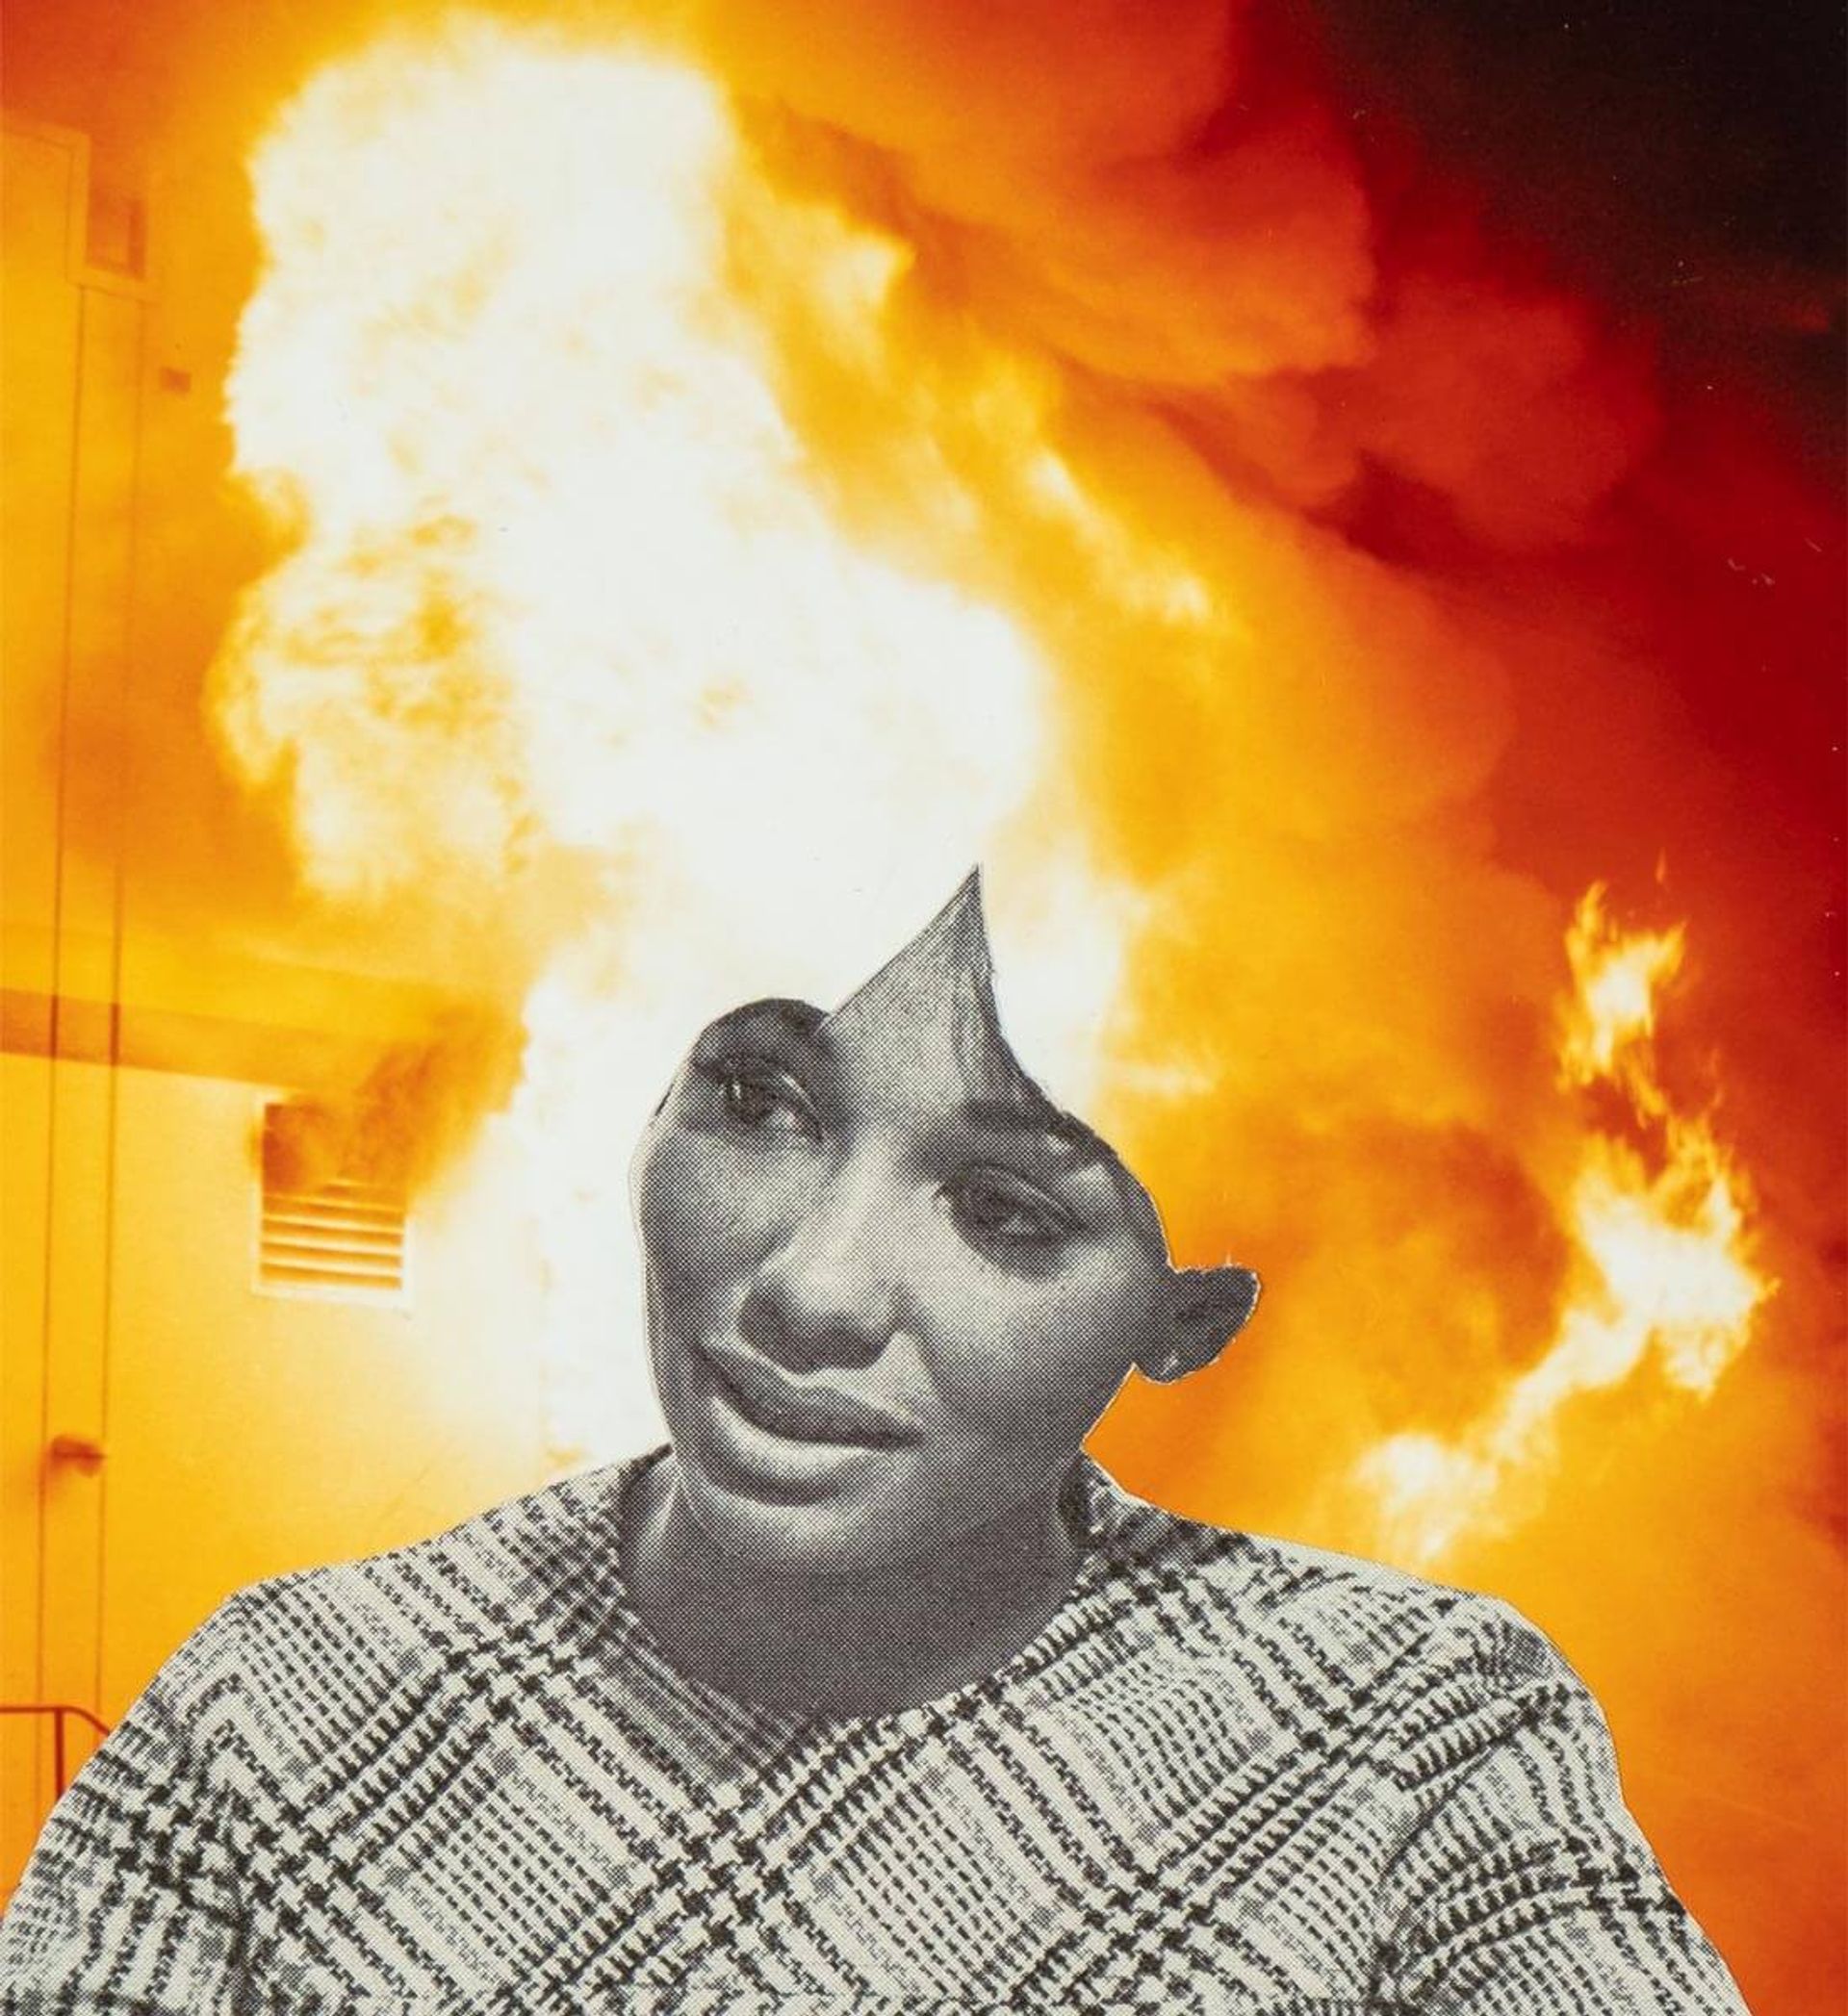 Lorna Simpson, Flames (detail, 2019) Photo: © Lorna Simpson. Courtesy the artist and Hauser & Wirth